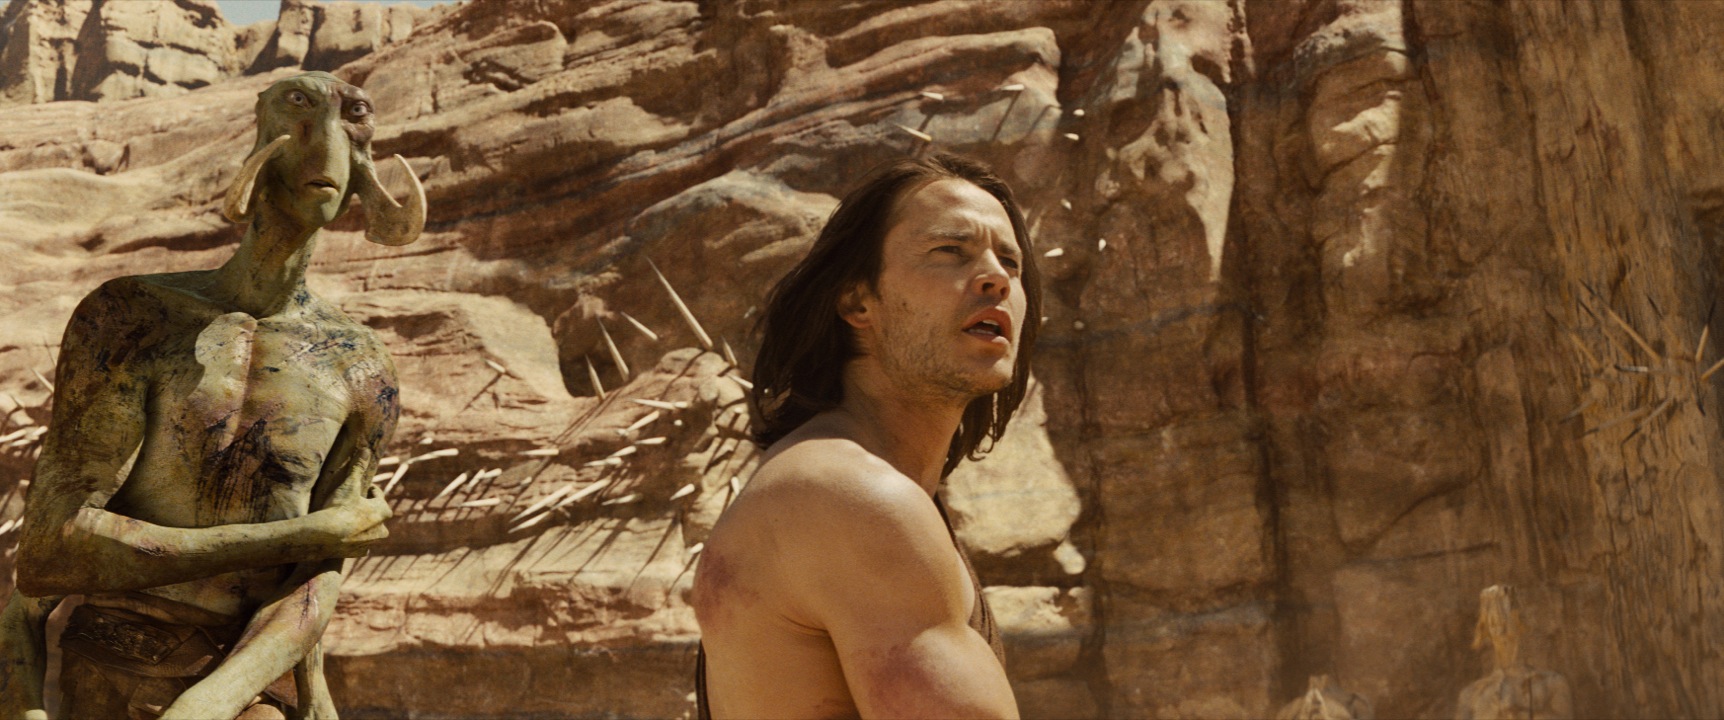 Taylor Kitsch zagra w "The Normal Heart"